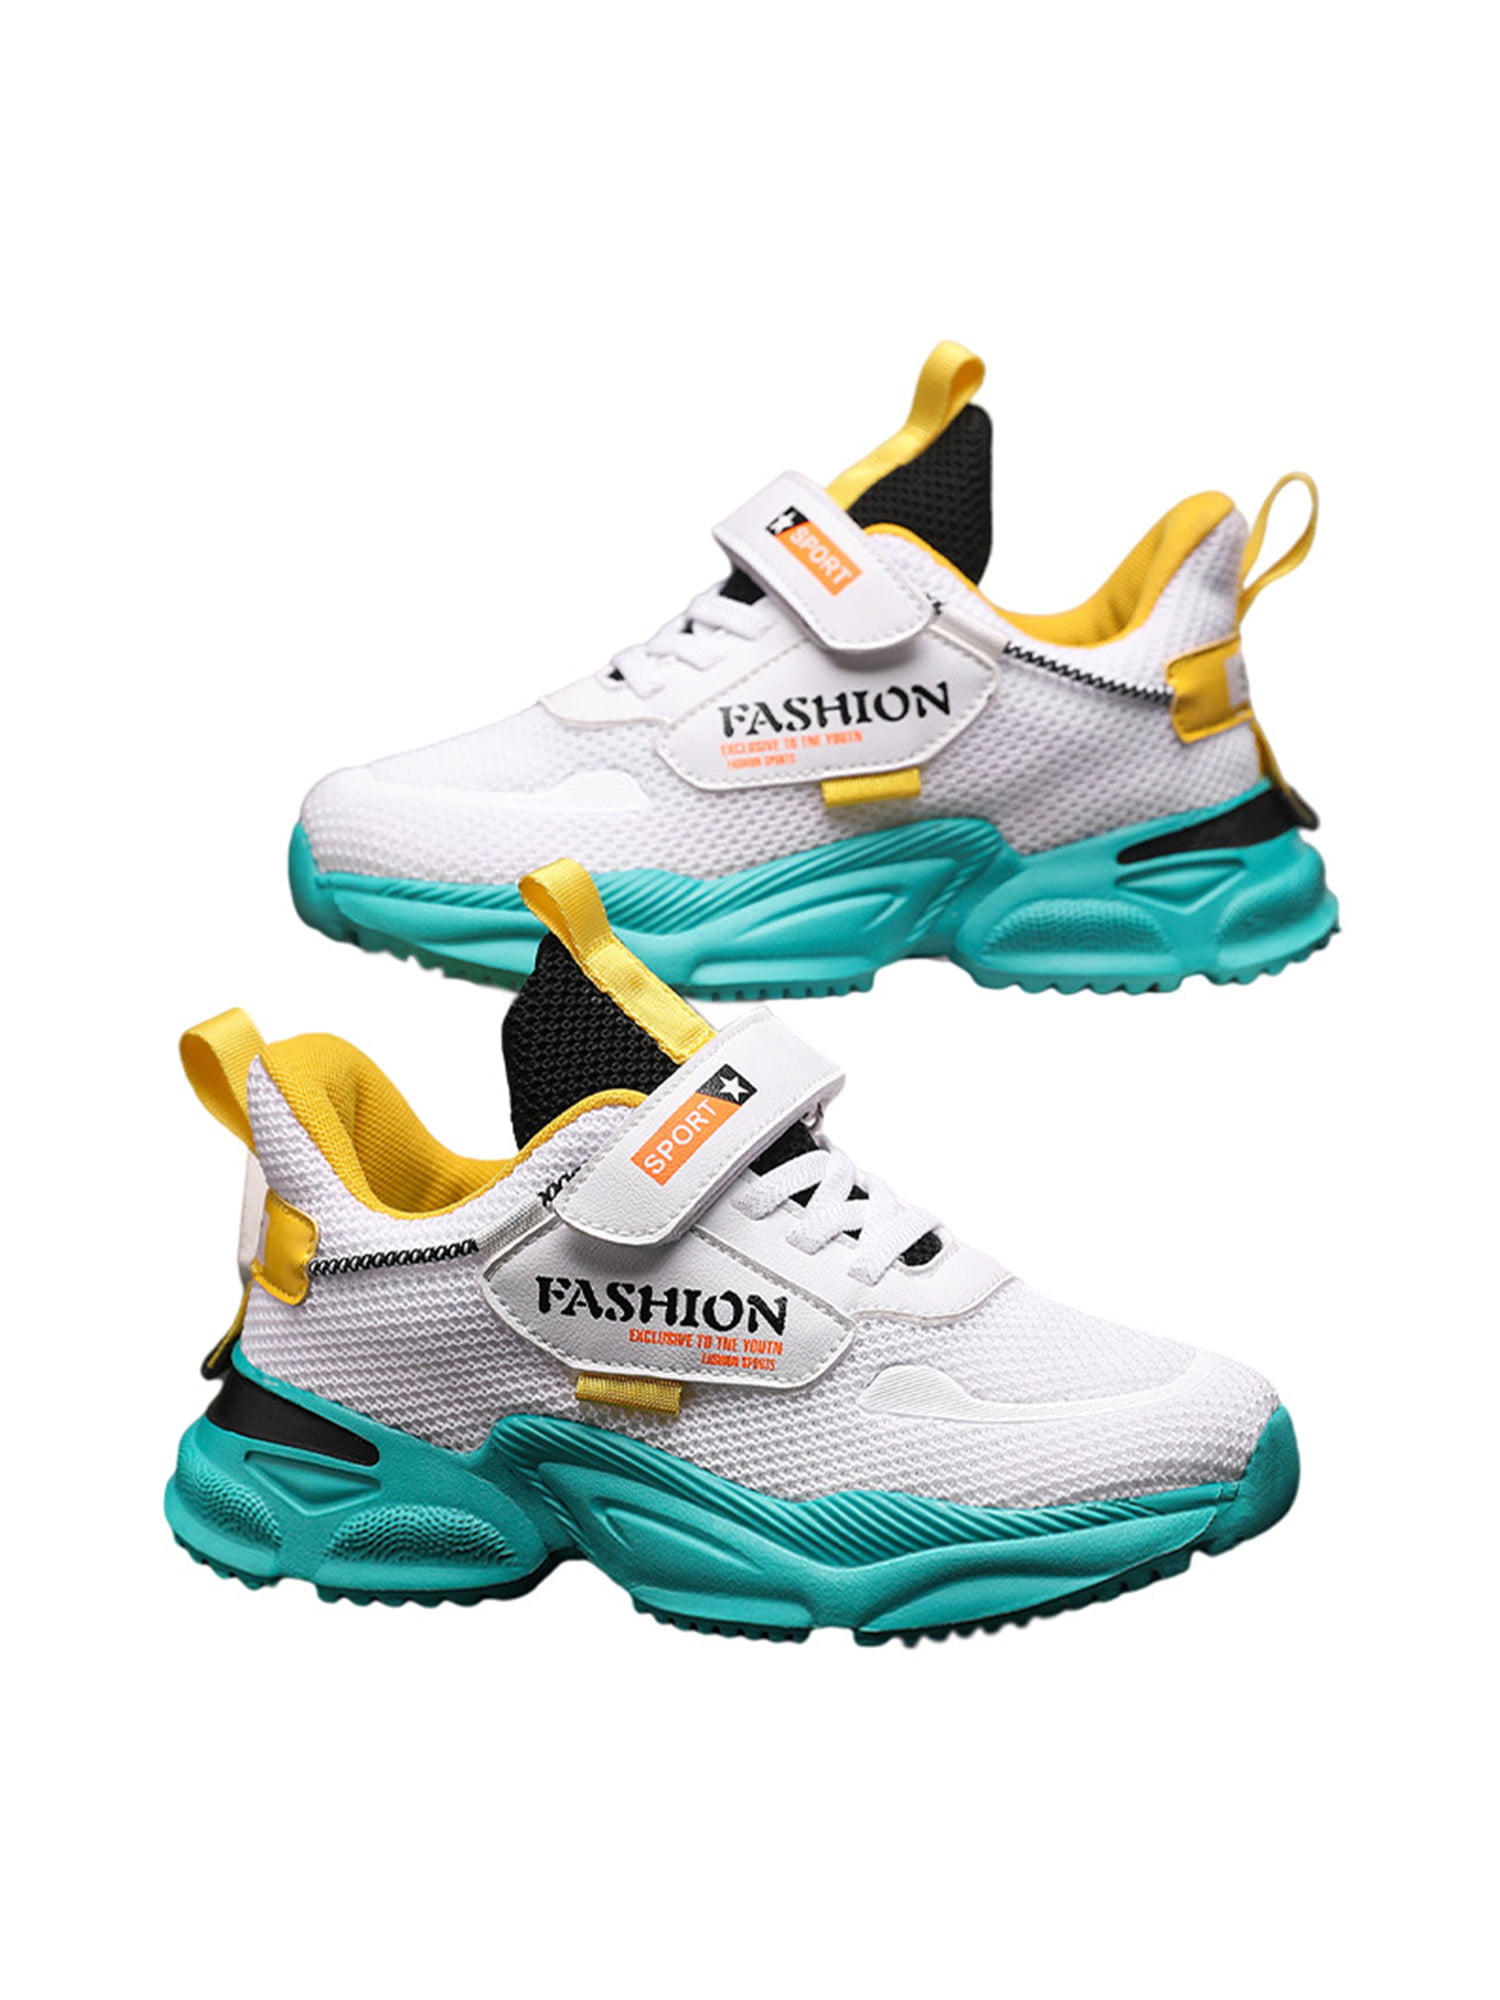 Boys Trainers Road Running Shoes Child Sneaker Athletic Girls Casual Shoes Indoor Court Shoes Lightweight Breathable